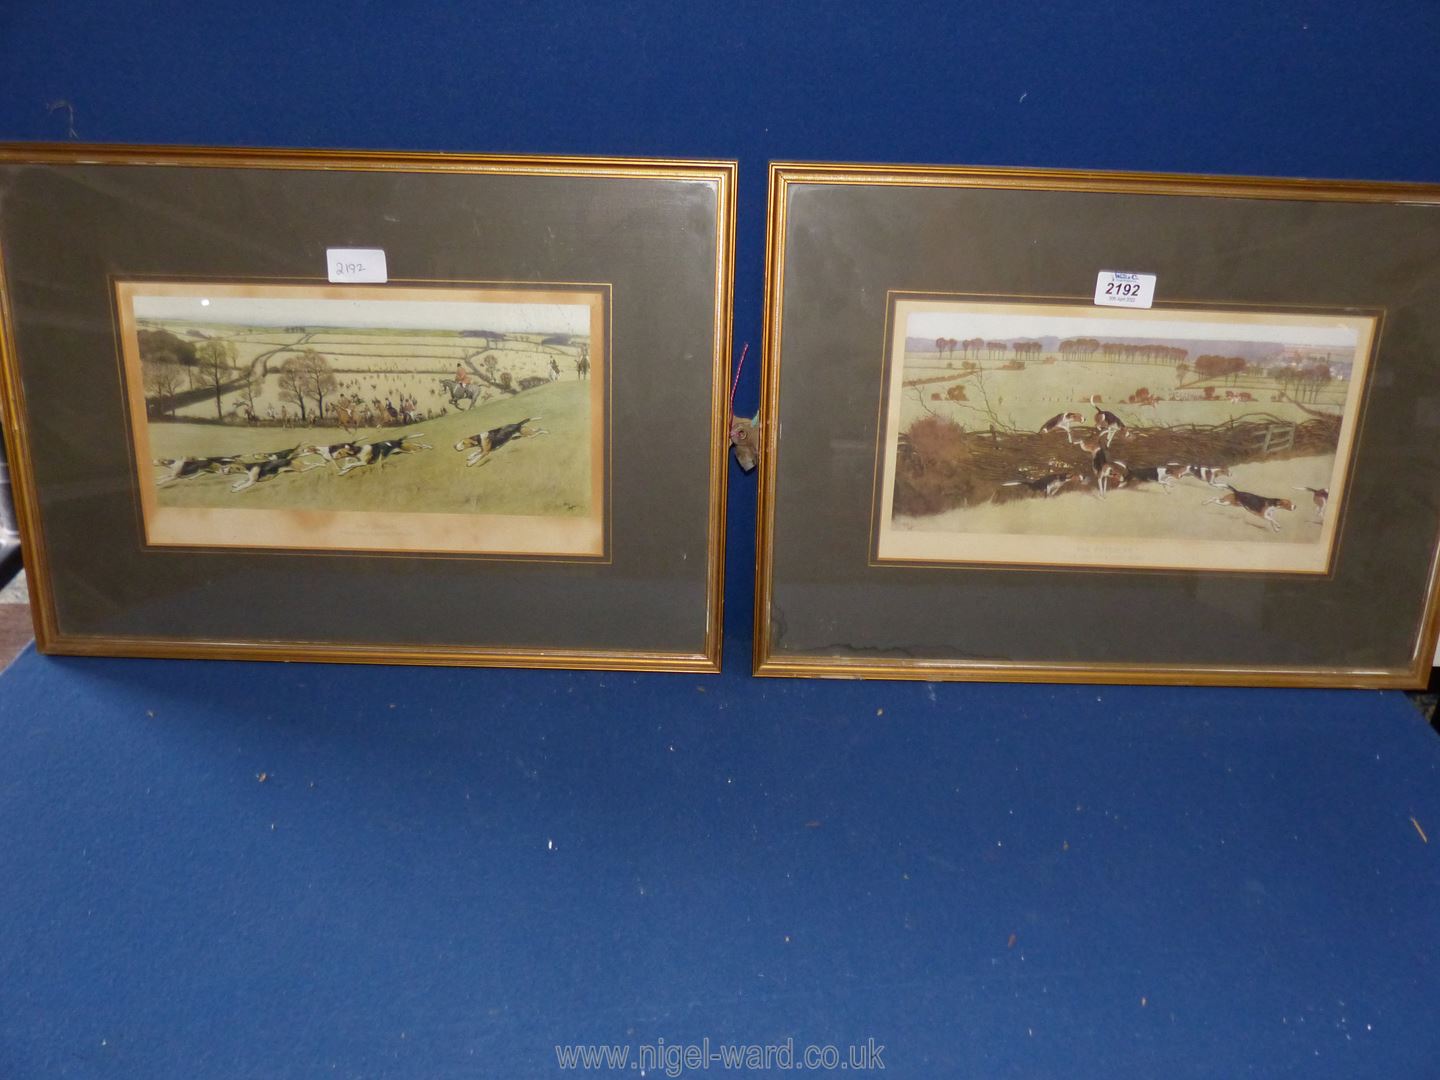 A pair of framed and mounted hunting Prints 'The Quorn from Billesdon Coplow' and 'The Pytchley